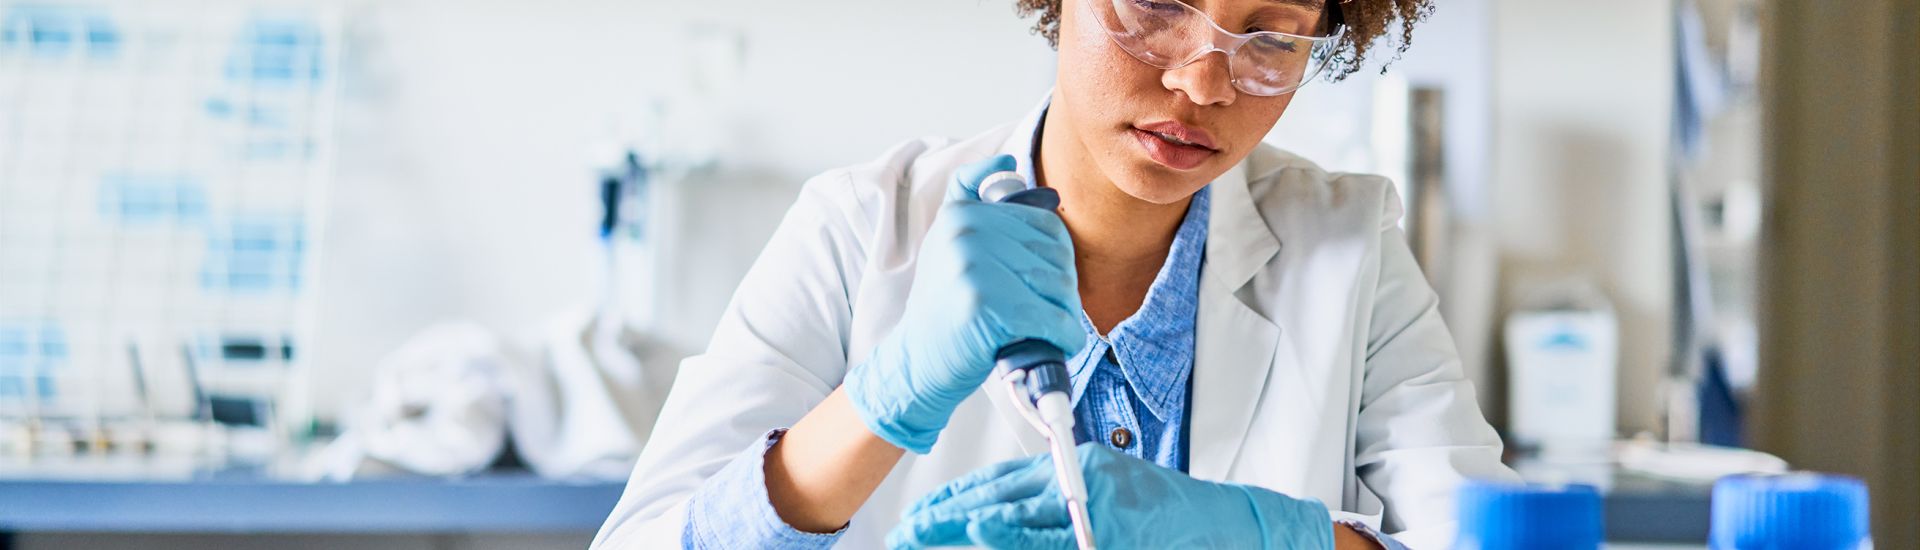 Woman in lab coat, safety goggles, and gloves, using a pipette in a lab.